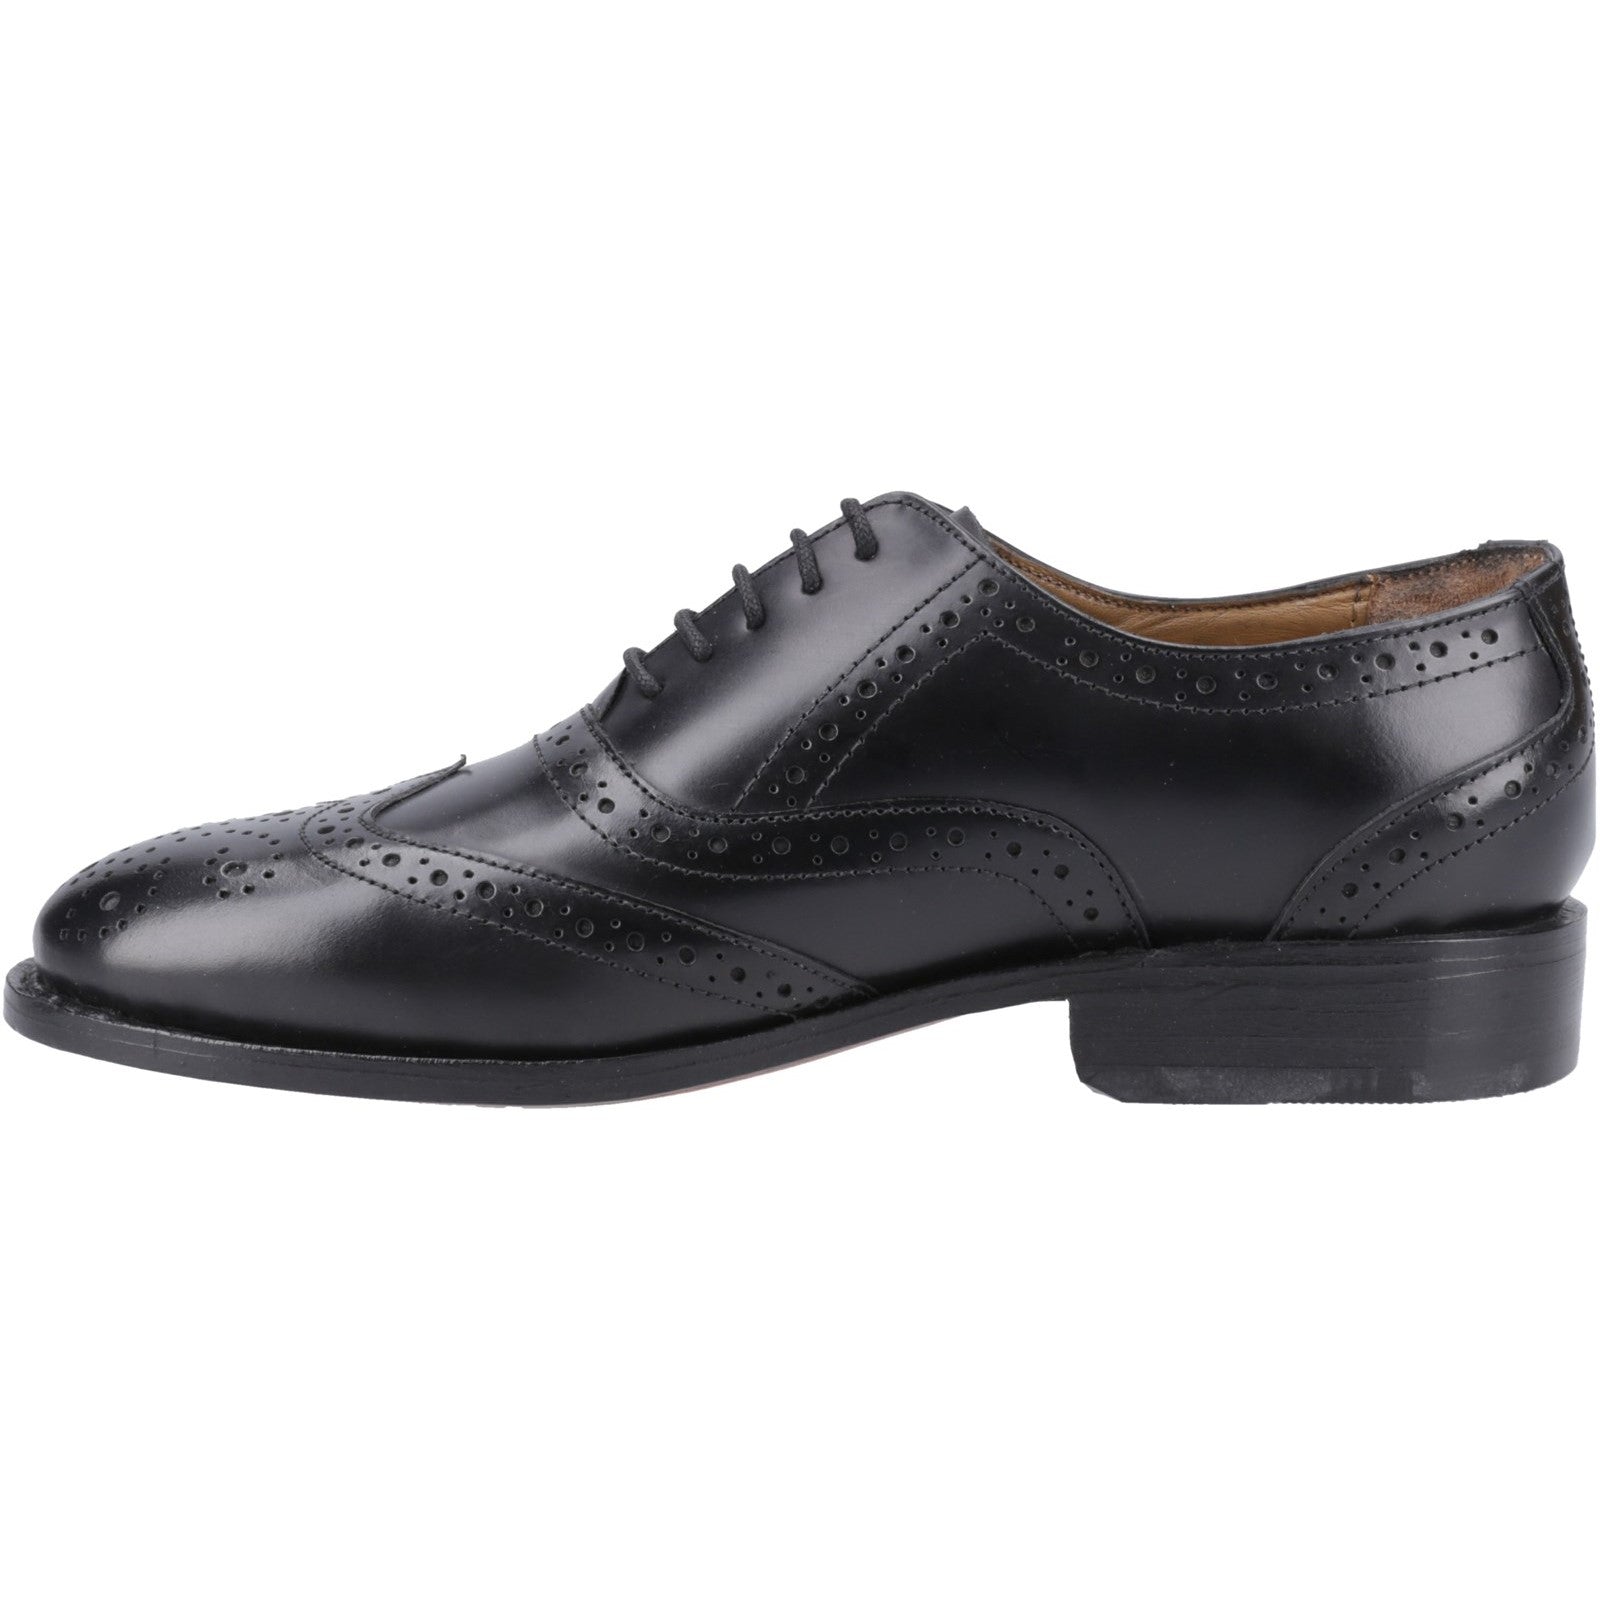 Amblers Ben Leather Soled Oxford Brogue